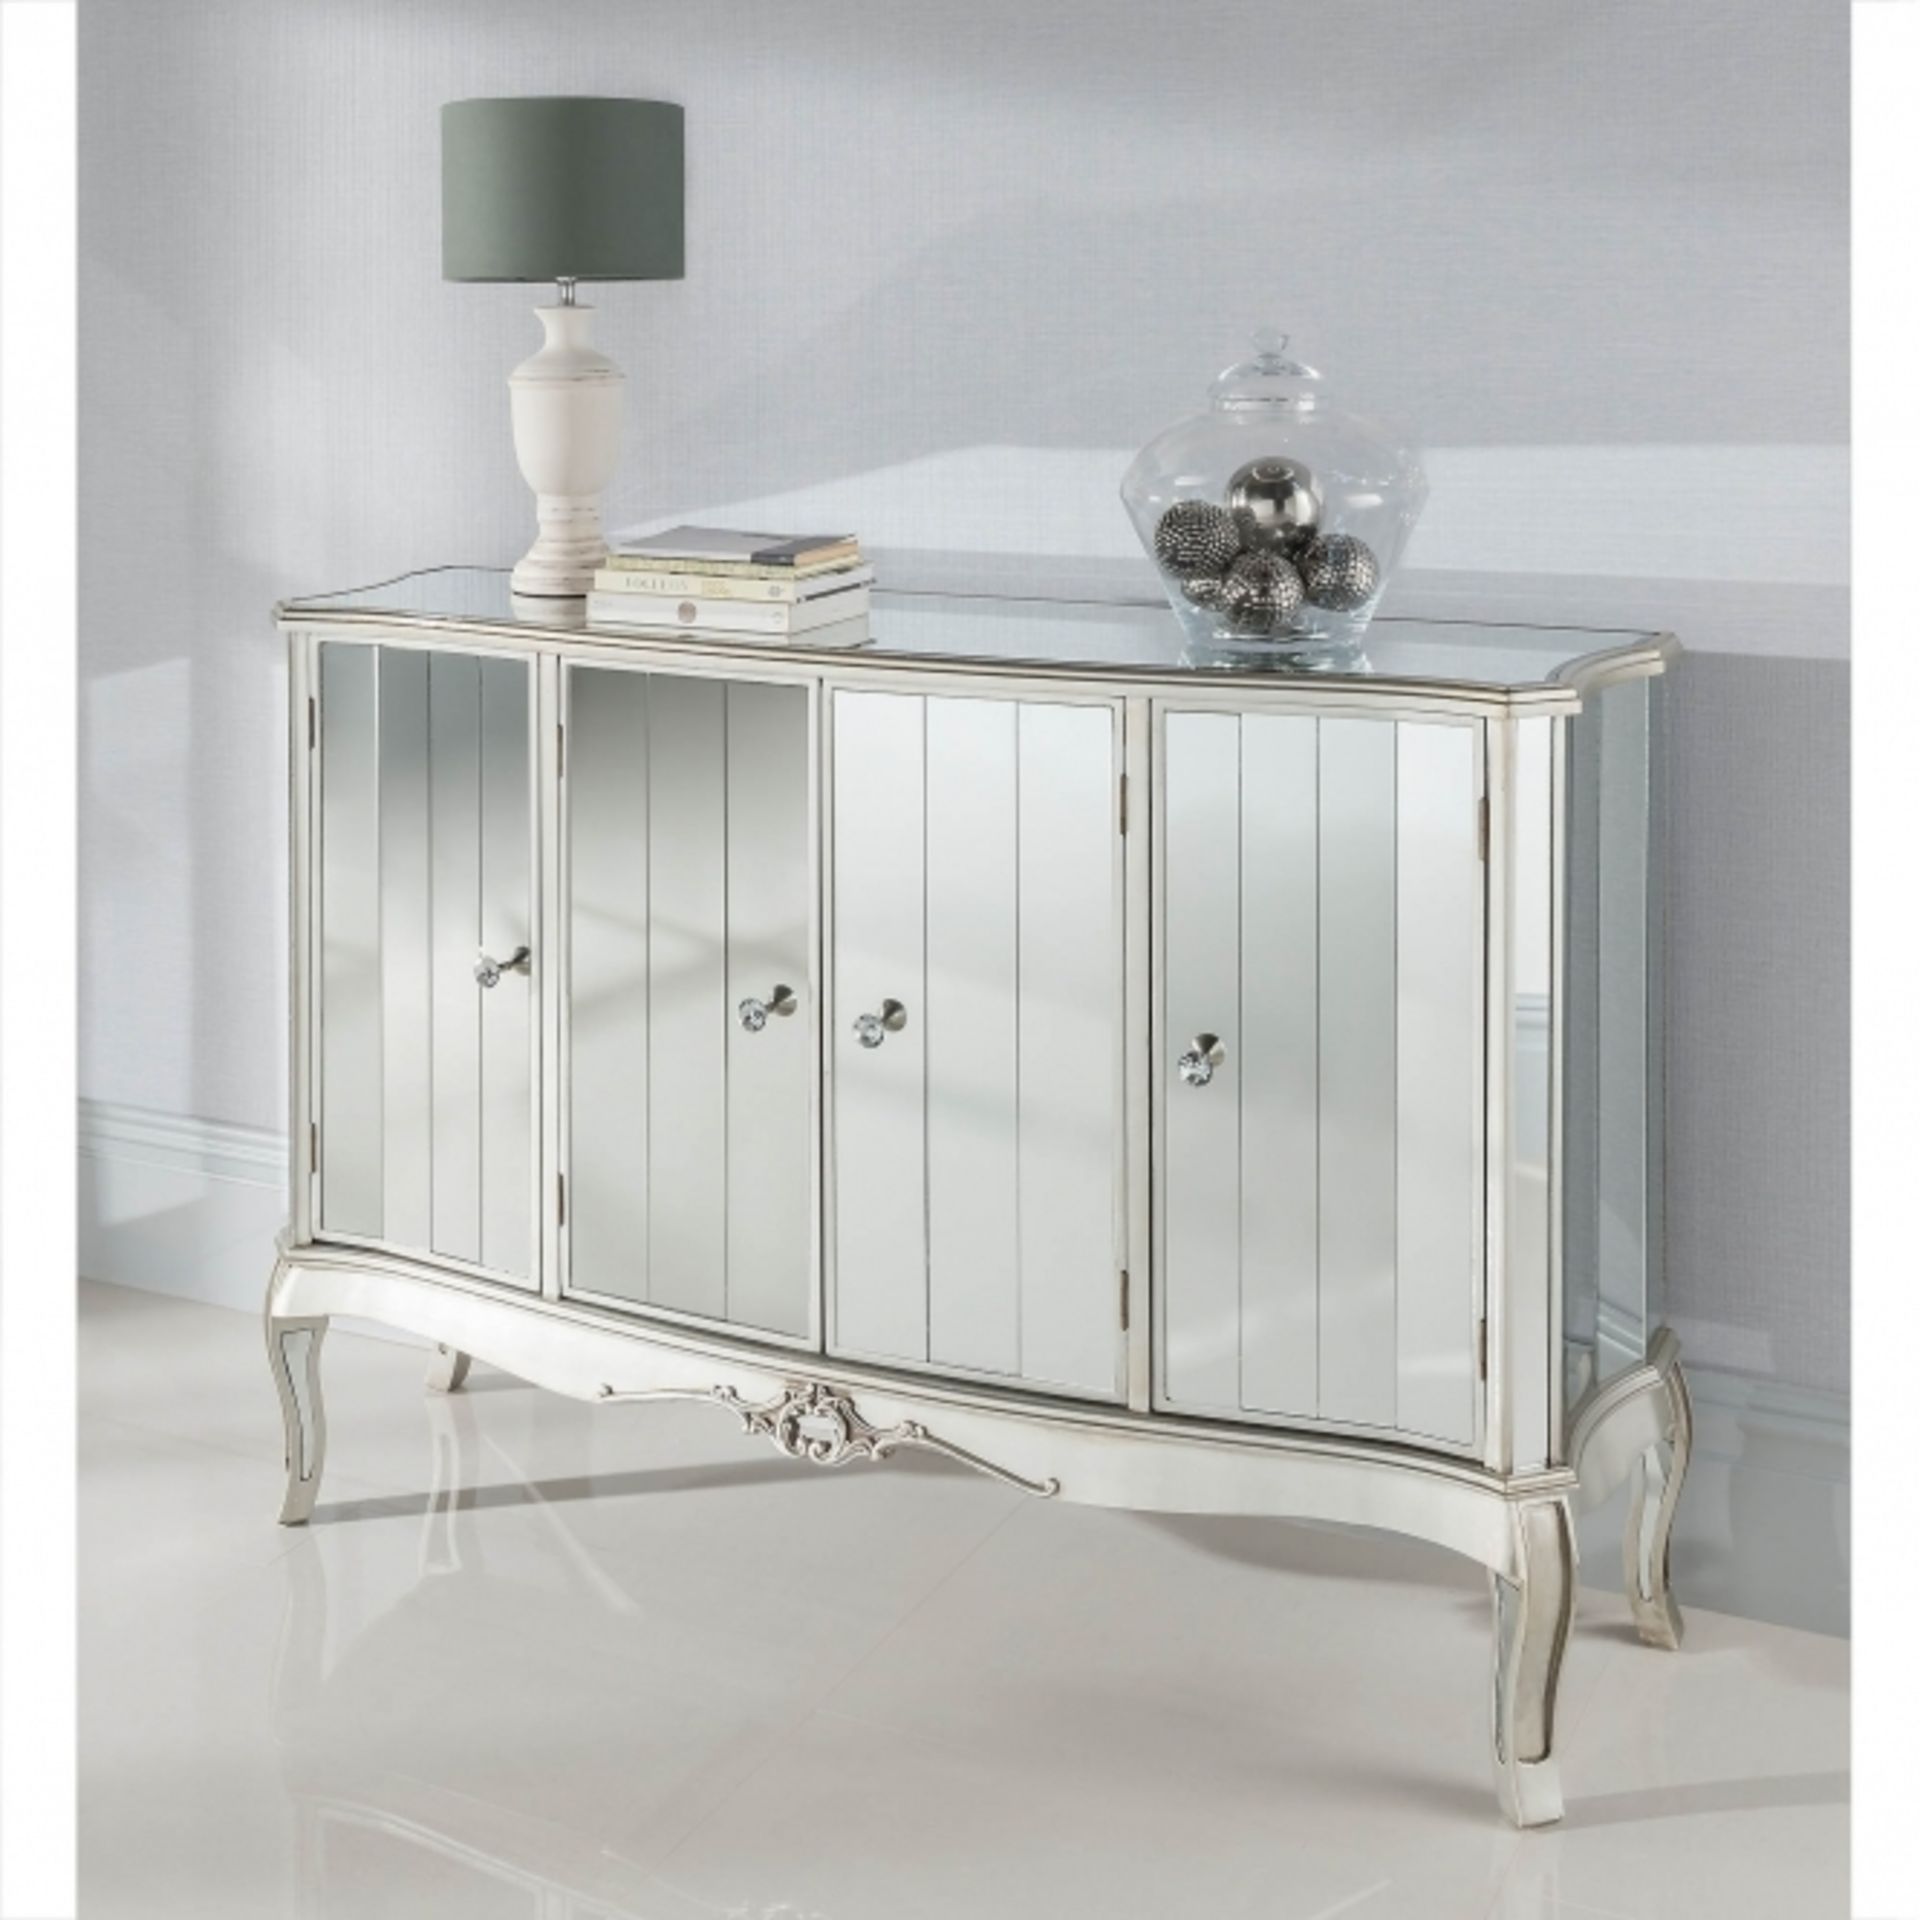 Alexandria Mirrored Four Door Sideboard This Is One Of The Larger Pieces In This Glamorous Range,